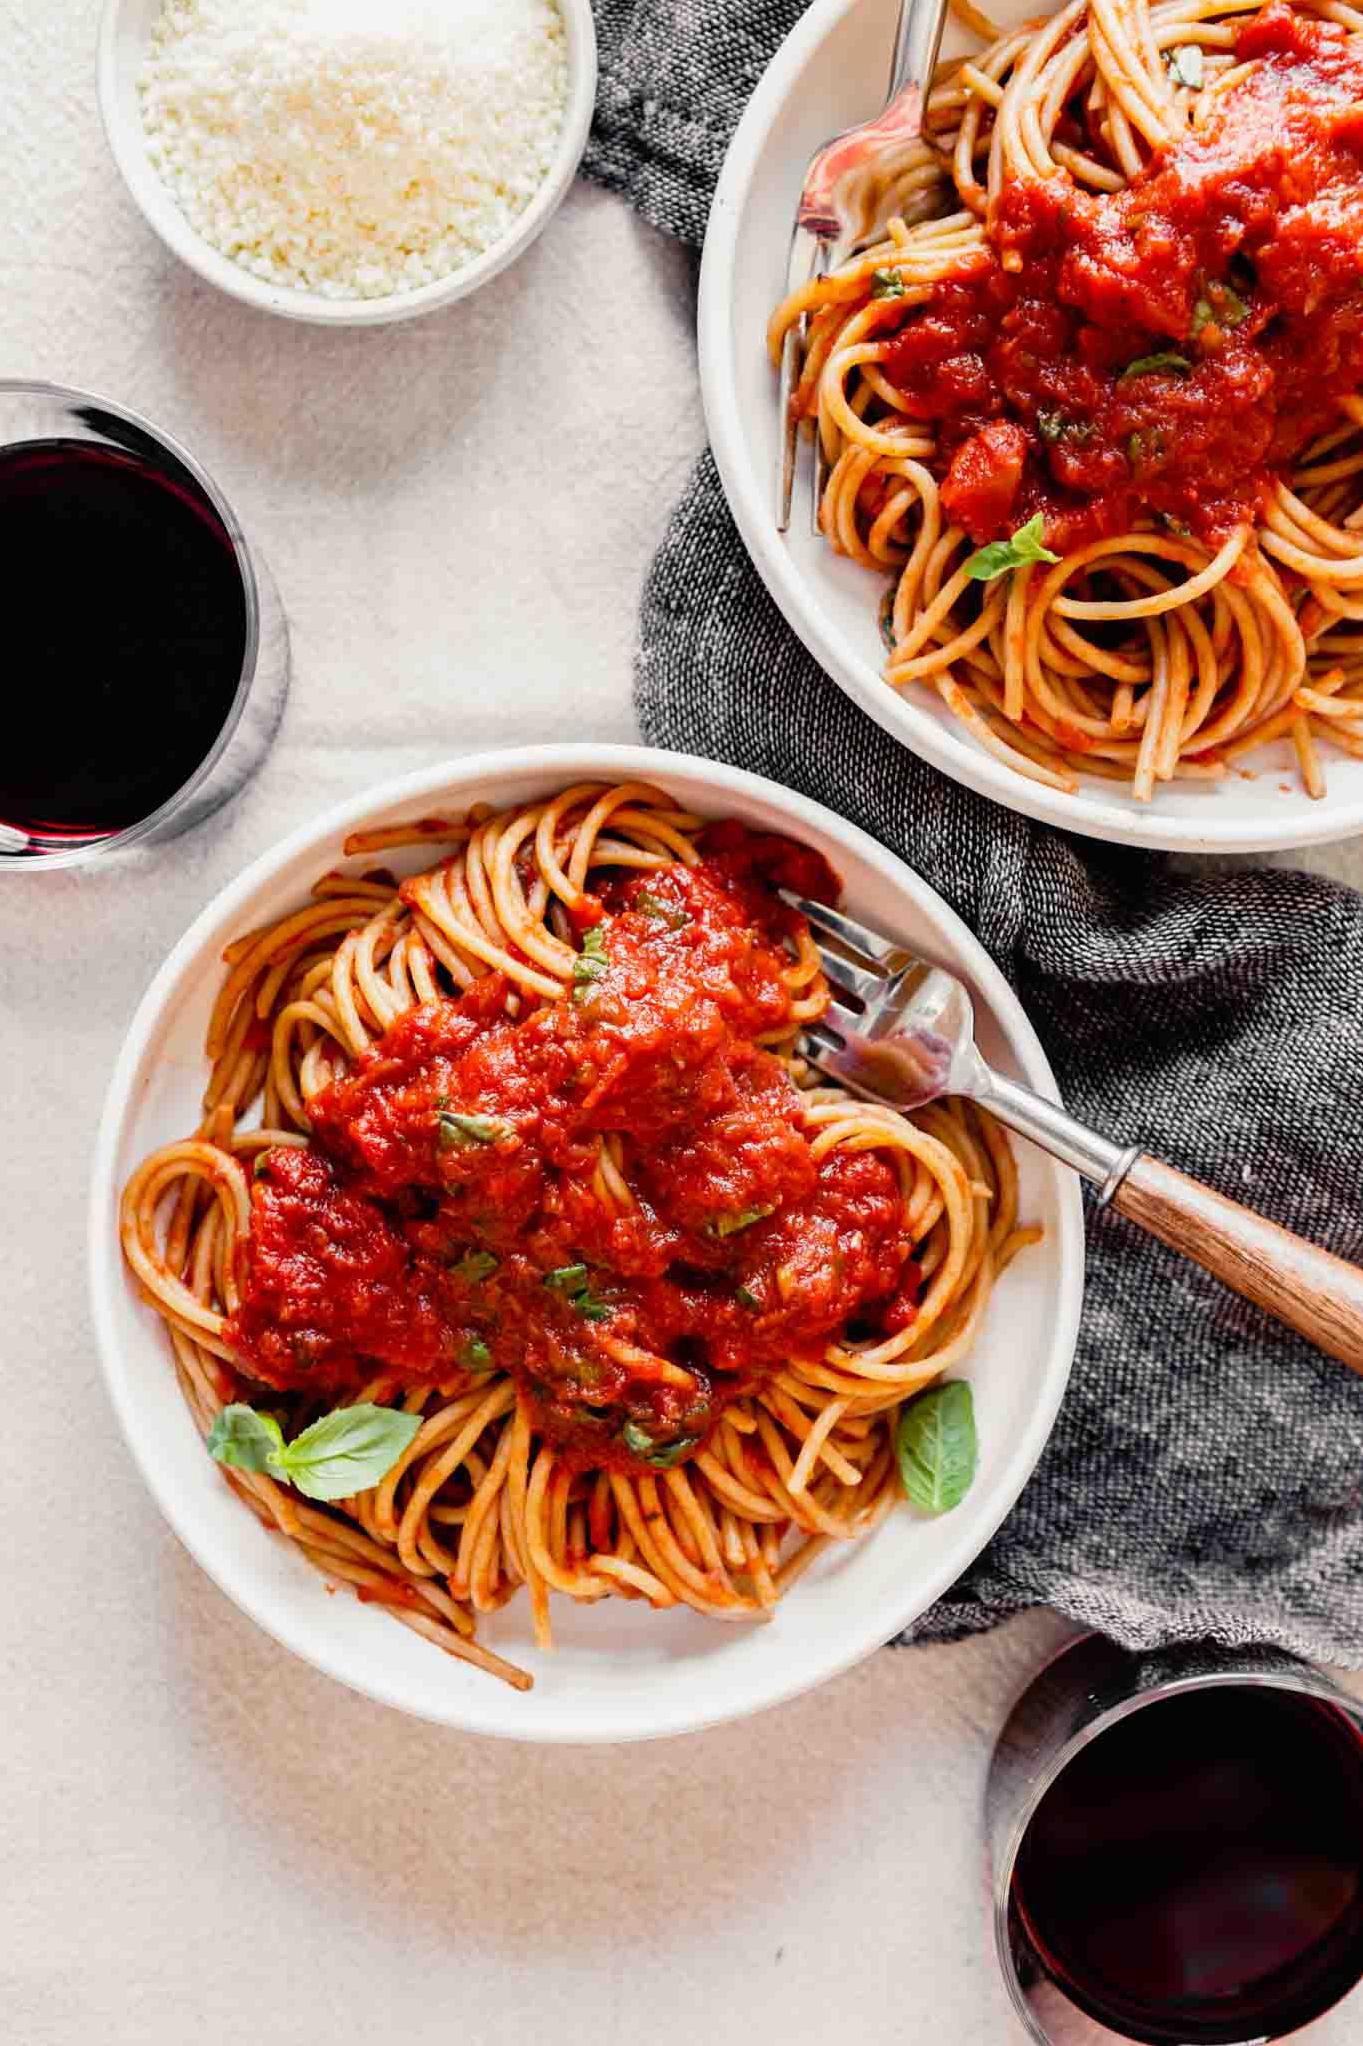  From vine to plate, this pasta dish is a beautiful embodiment of the best flavors of Italy.